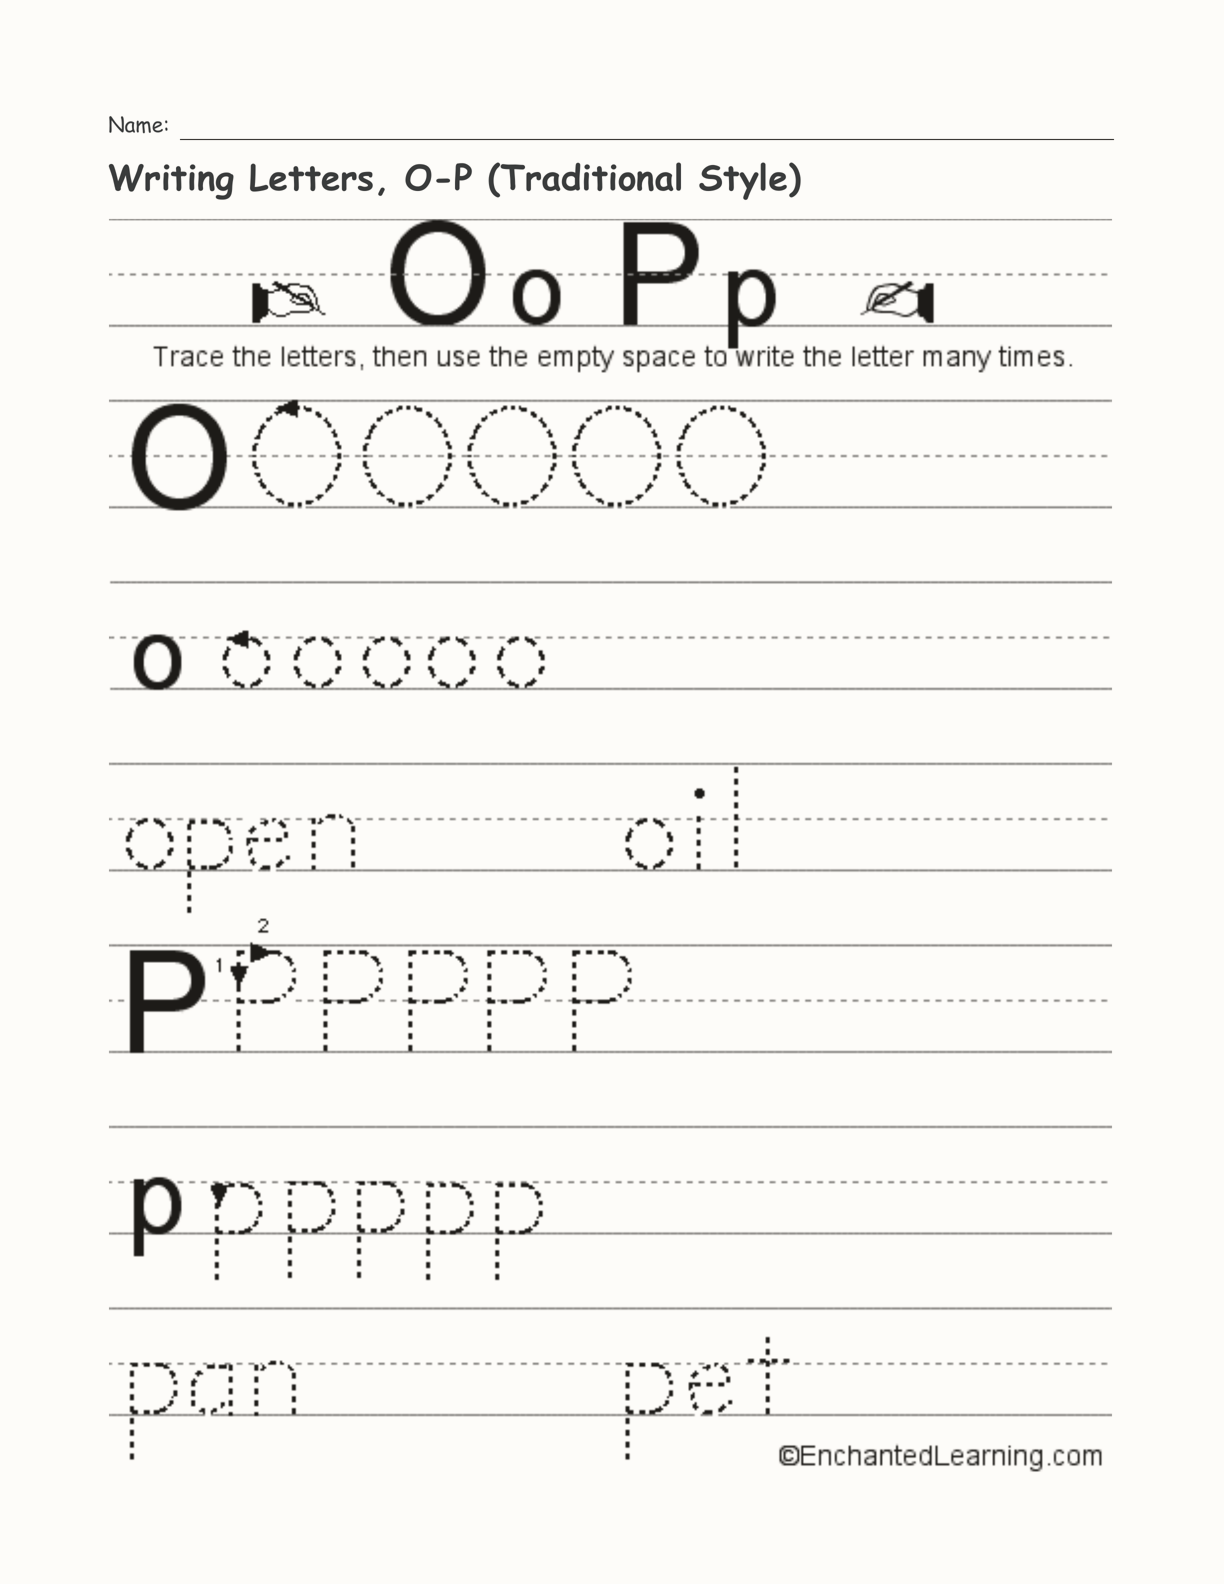 Writing Letters, O-P (Traditional Style) interactive worksheet page 1